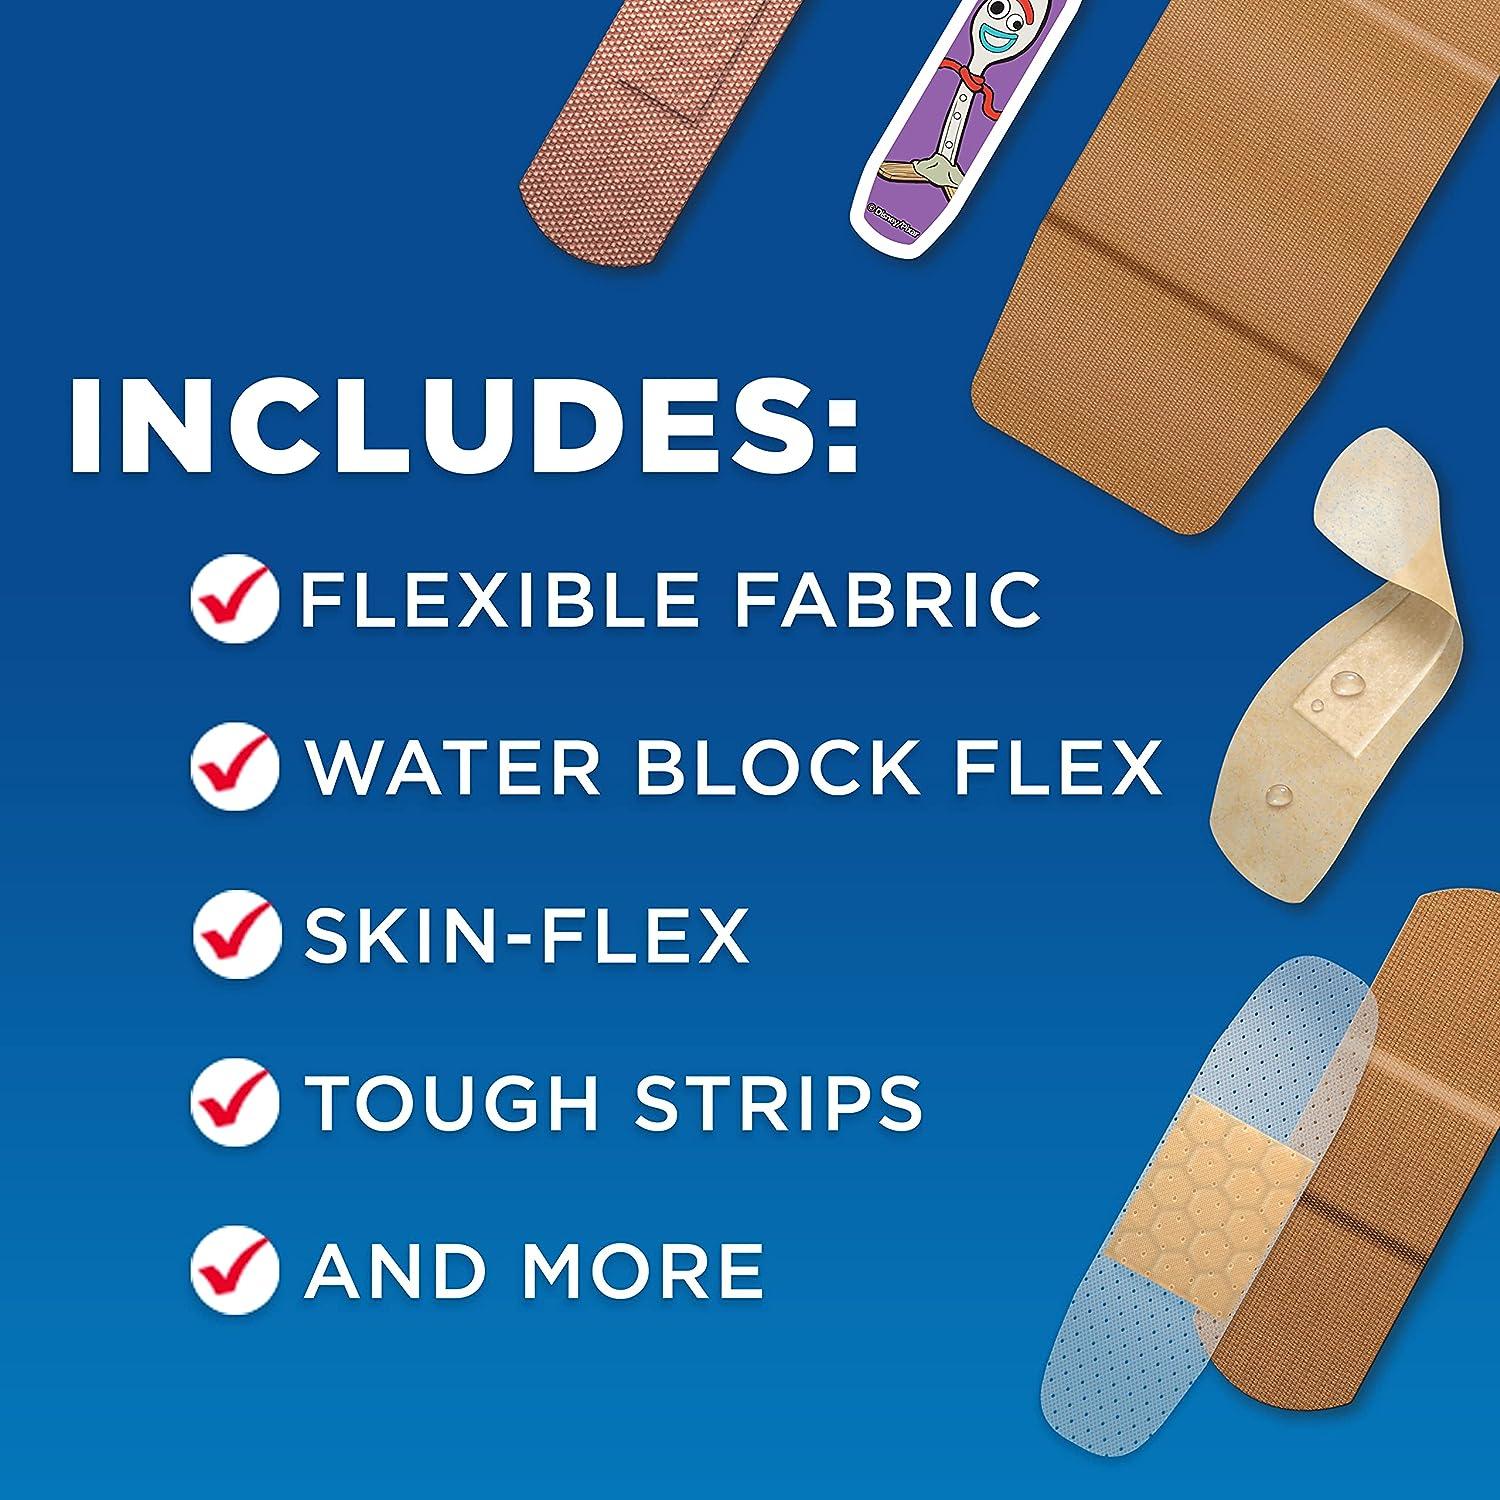 Band-Aid Adhesive Bandage Family Variety Pack in Assorted Sizes Featuring  Water Block & Skin Flex, Flexible Fabric, Tough Strips & Pixar Character  Bandages, 110 Count 110 Piece Assortment